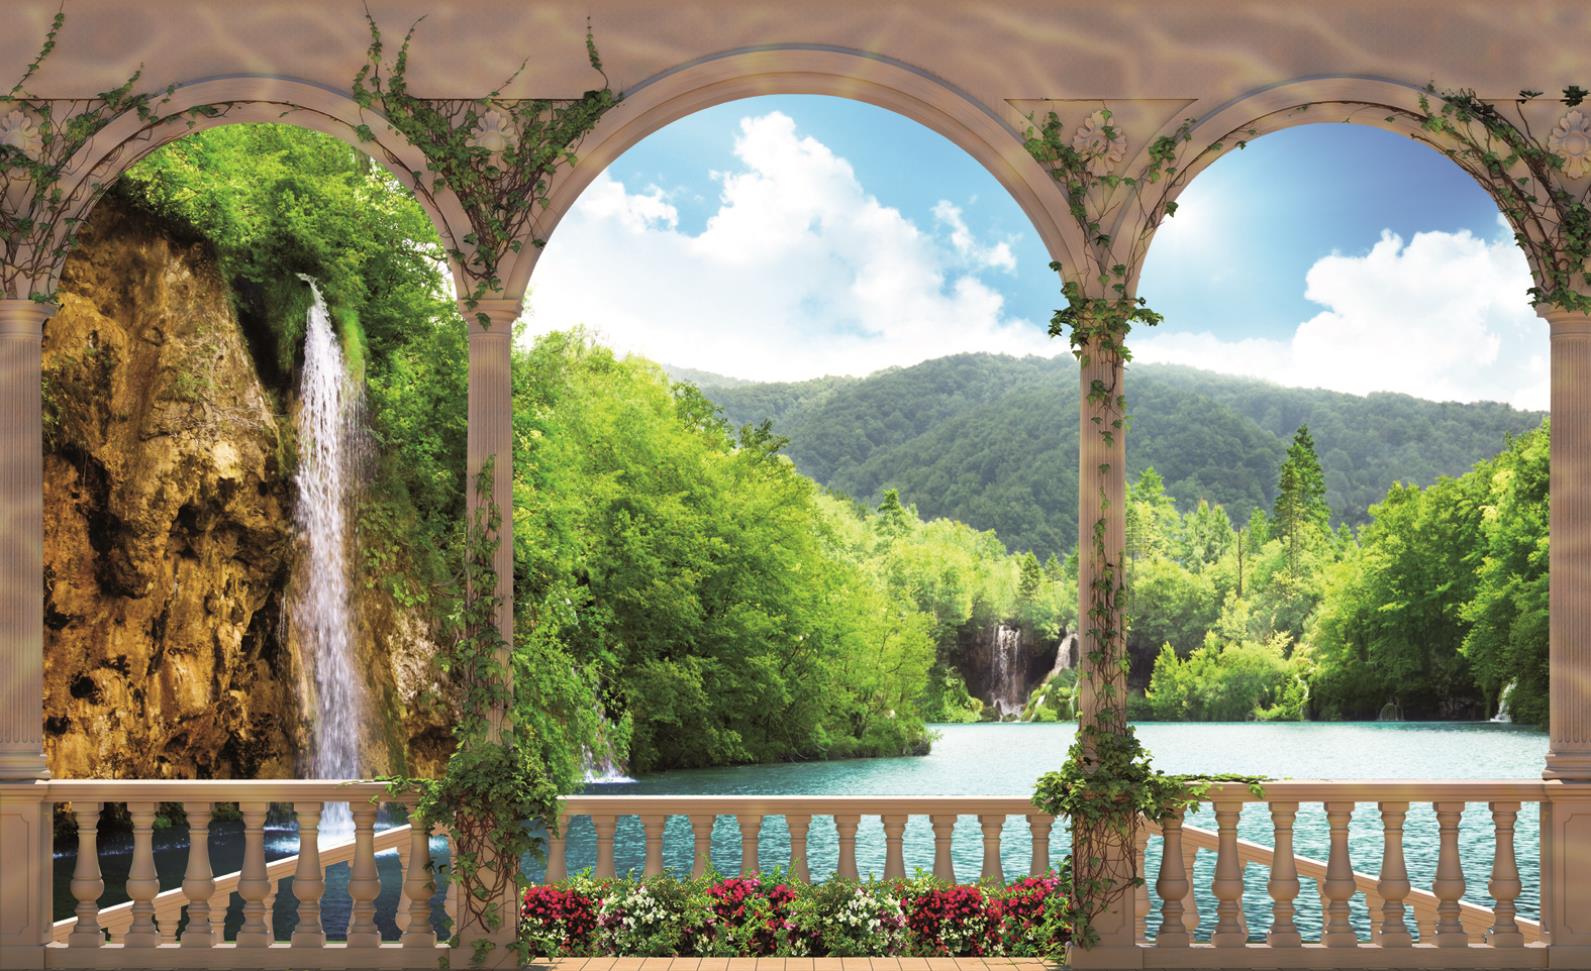  about Arches Landscape Lake PHOTO WALLPAPER WALL MURAL ROOM   1079P 1591x971